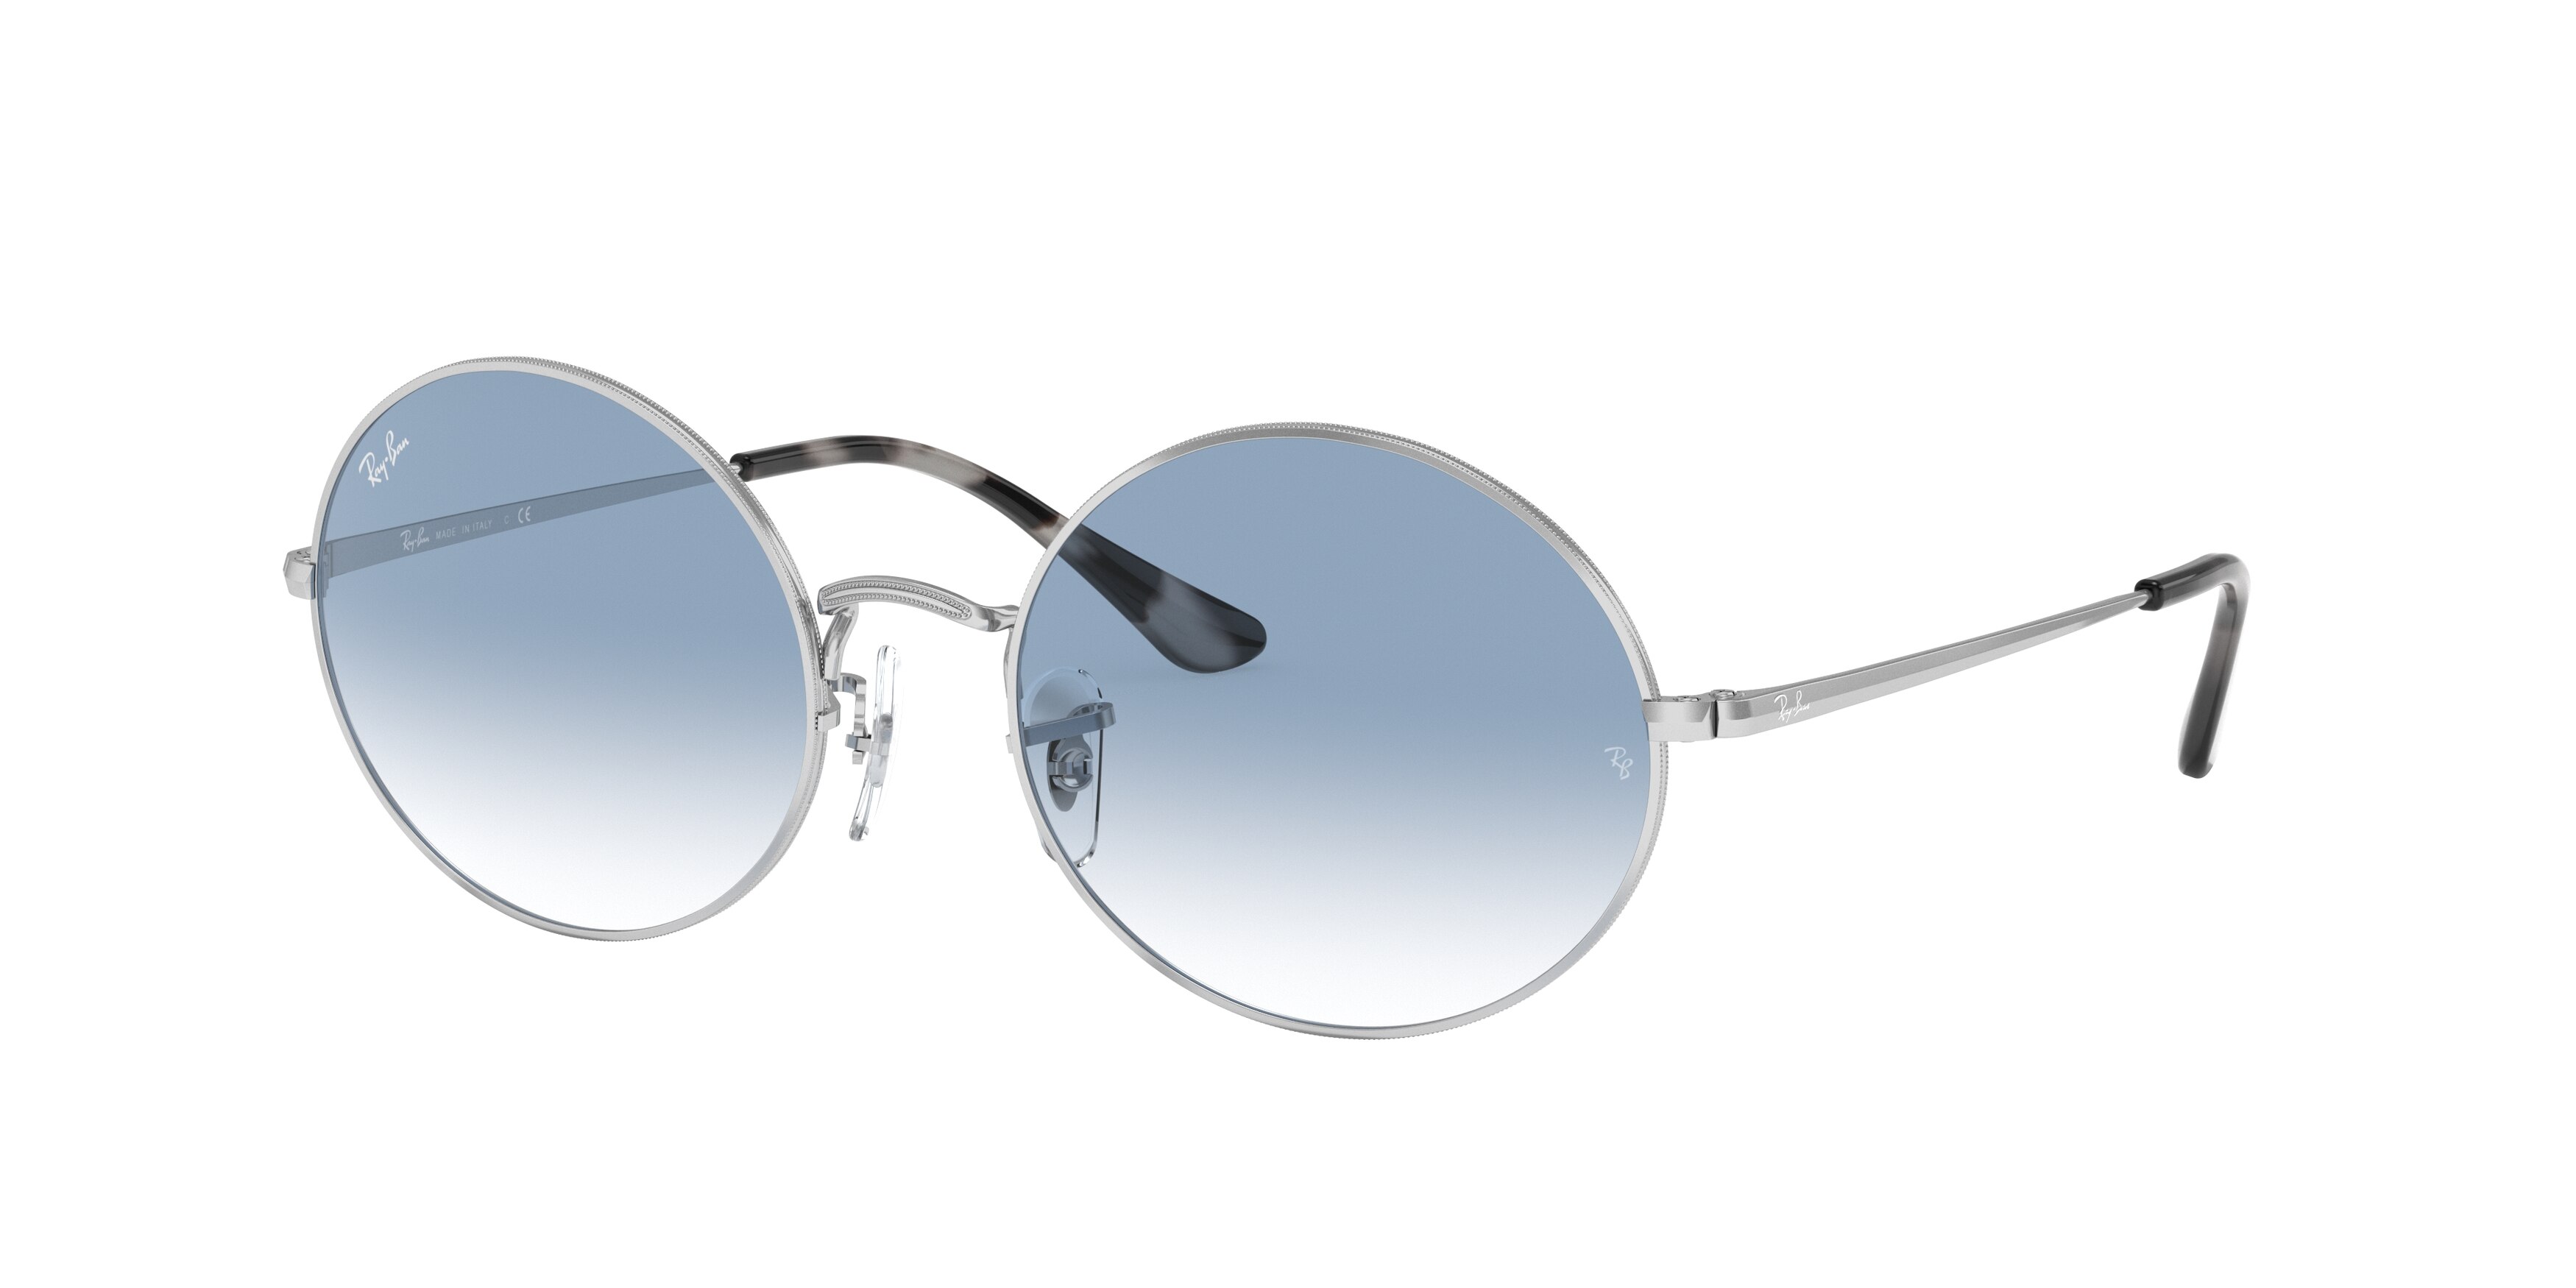 Ray Ban RB1970 91493F Oval 